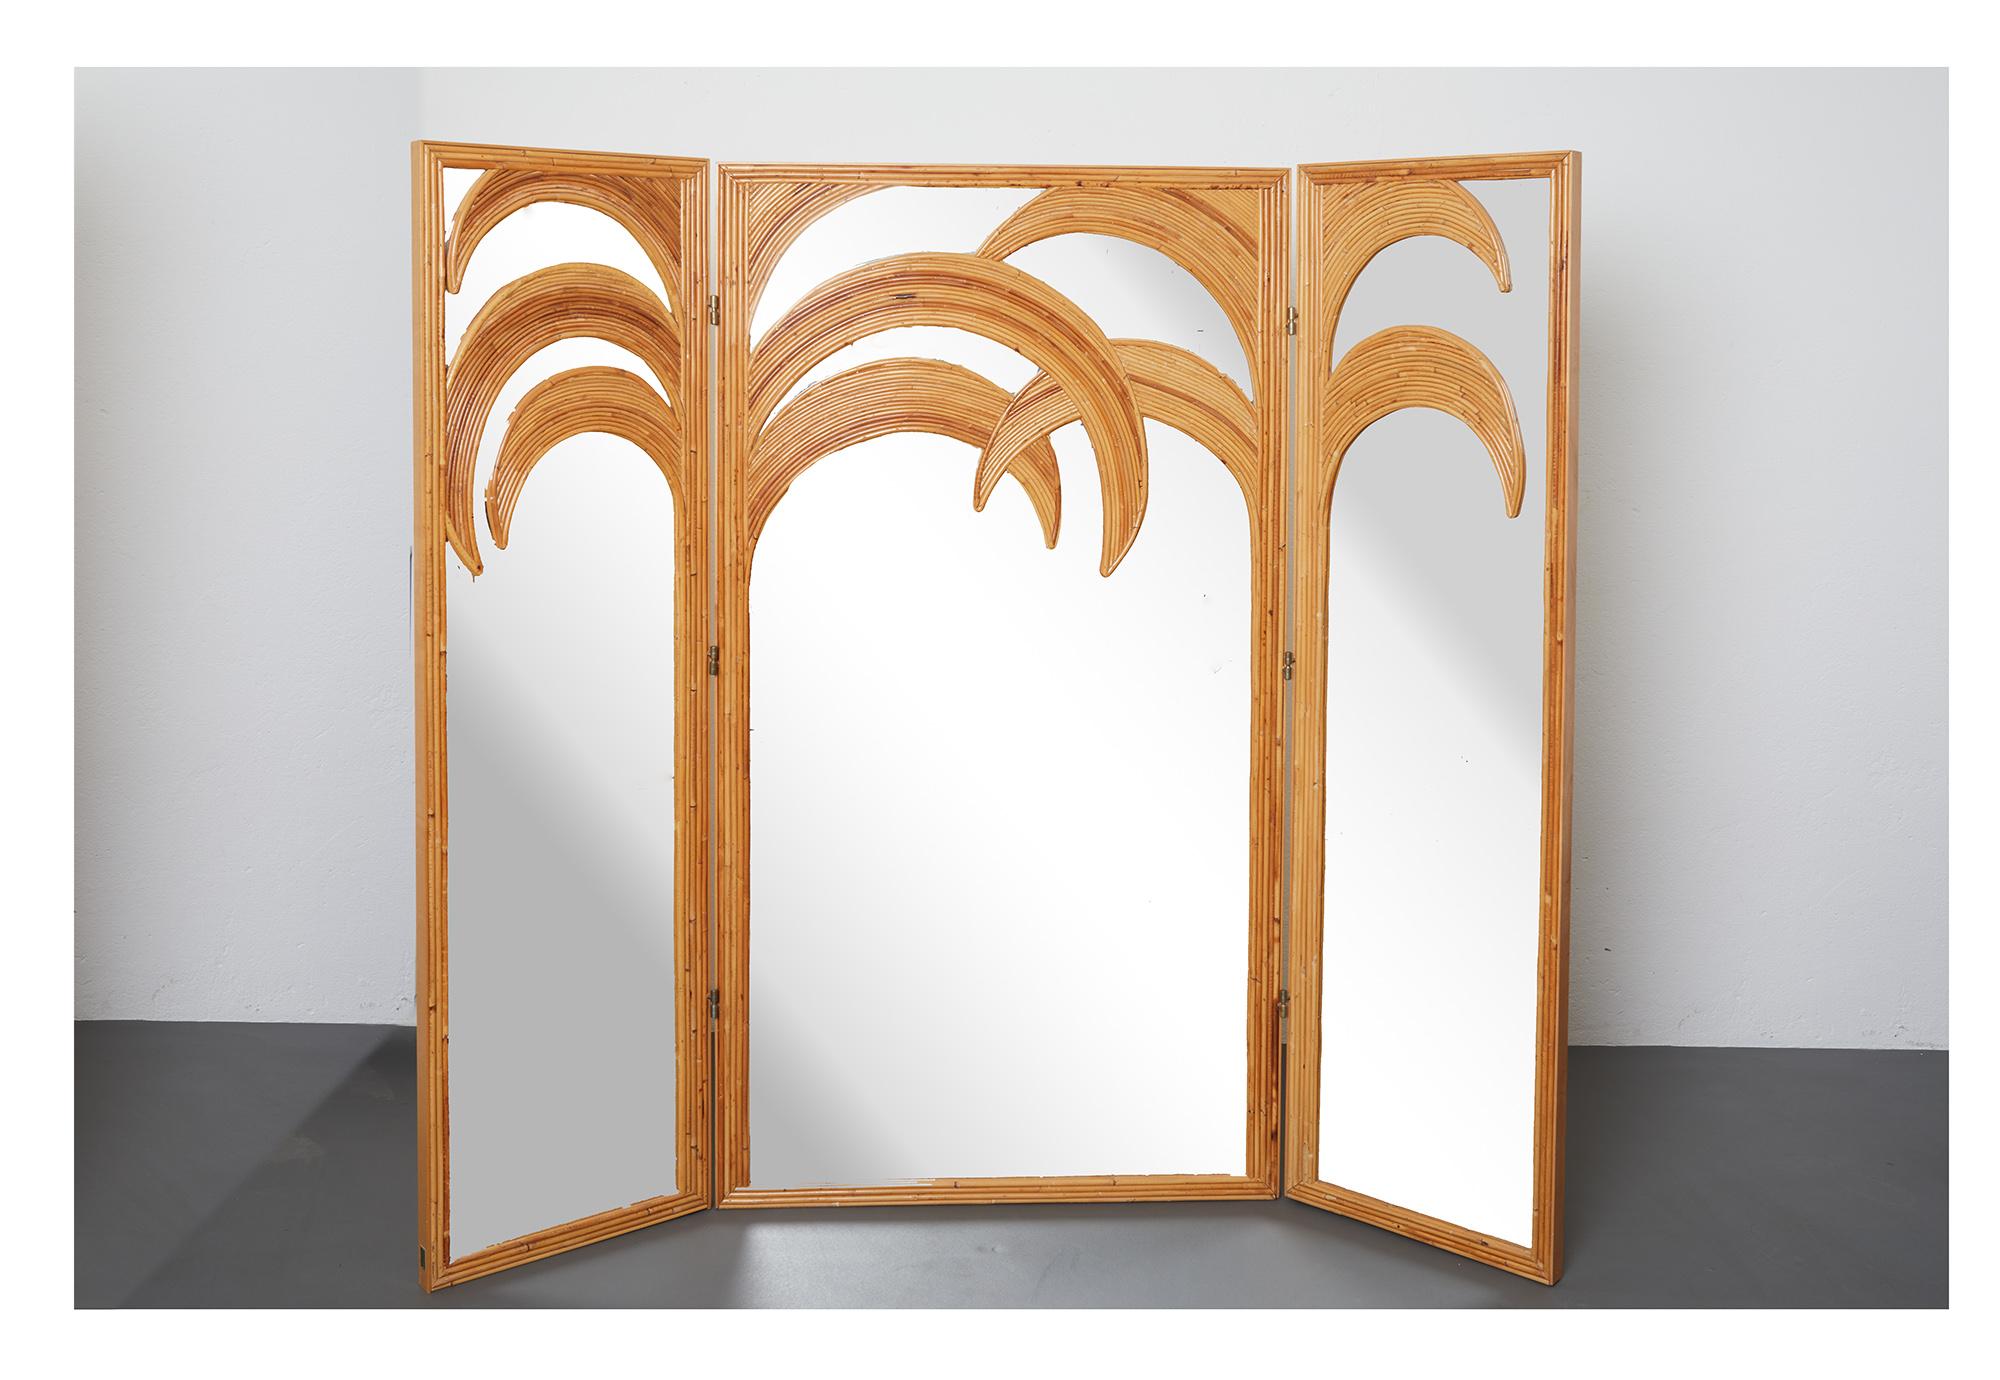 Exquisite hand-crafted free-standing mirrored screen or room divider from the 'Parma' series designed by Giorgio and Gianfranco di Pierri for Vivai del Sud, Italy 1970

The screen is composed of three articulate panels with a wooden structure and